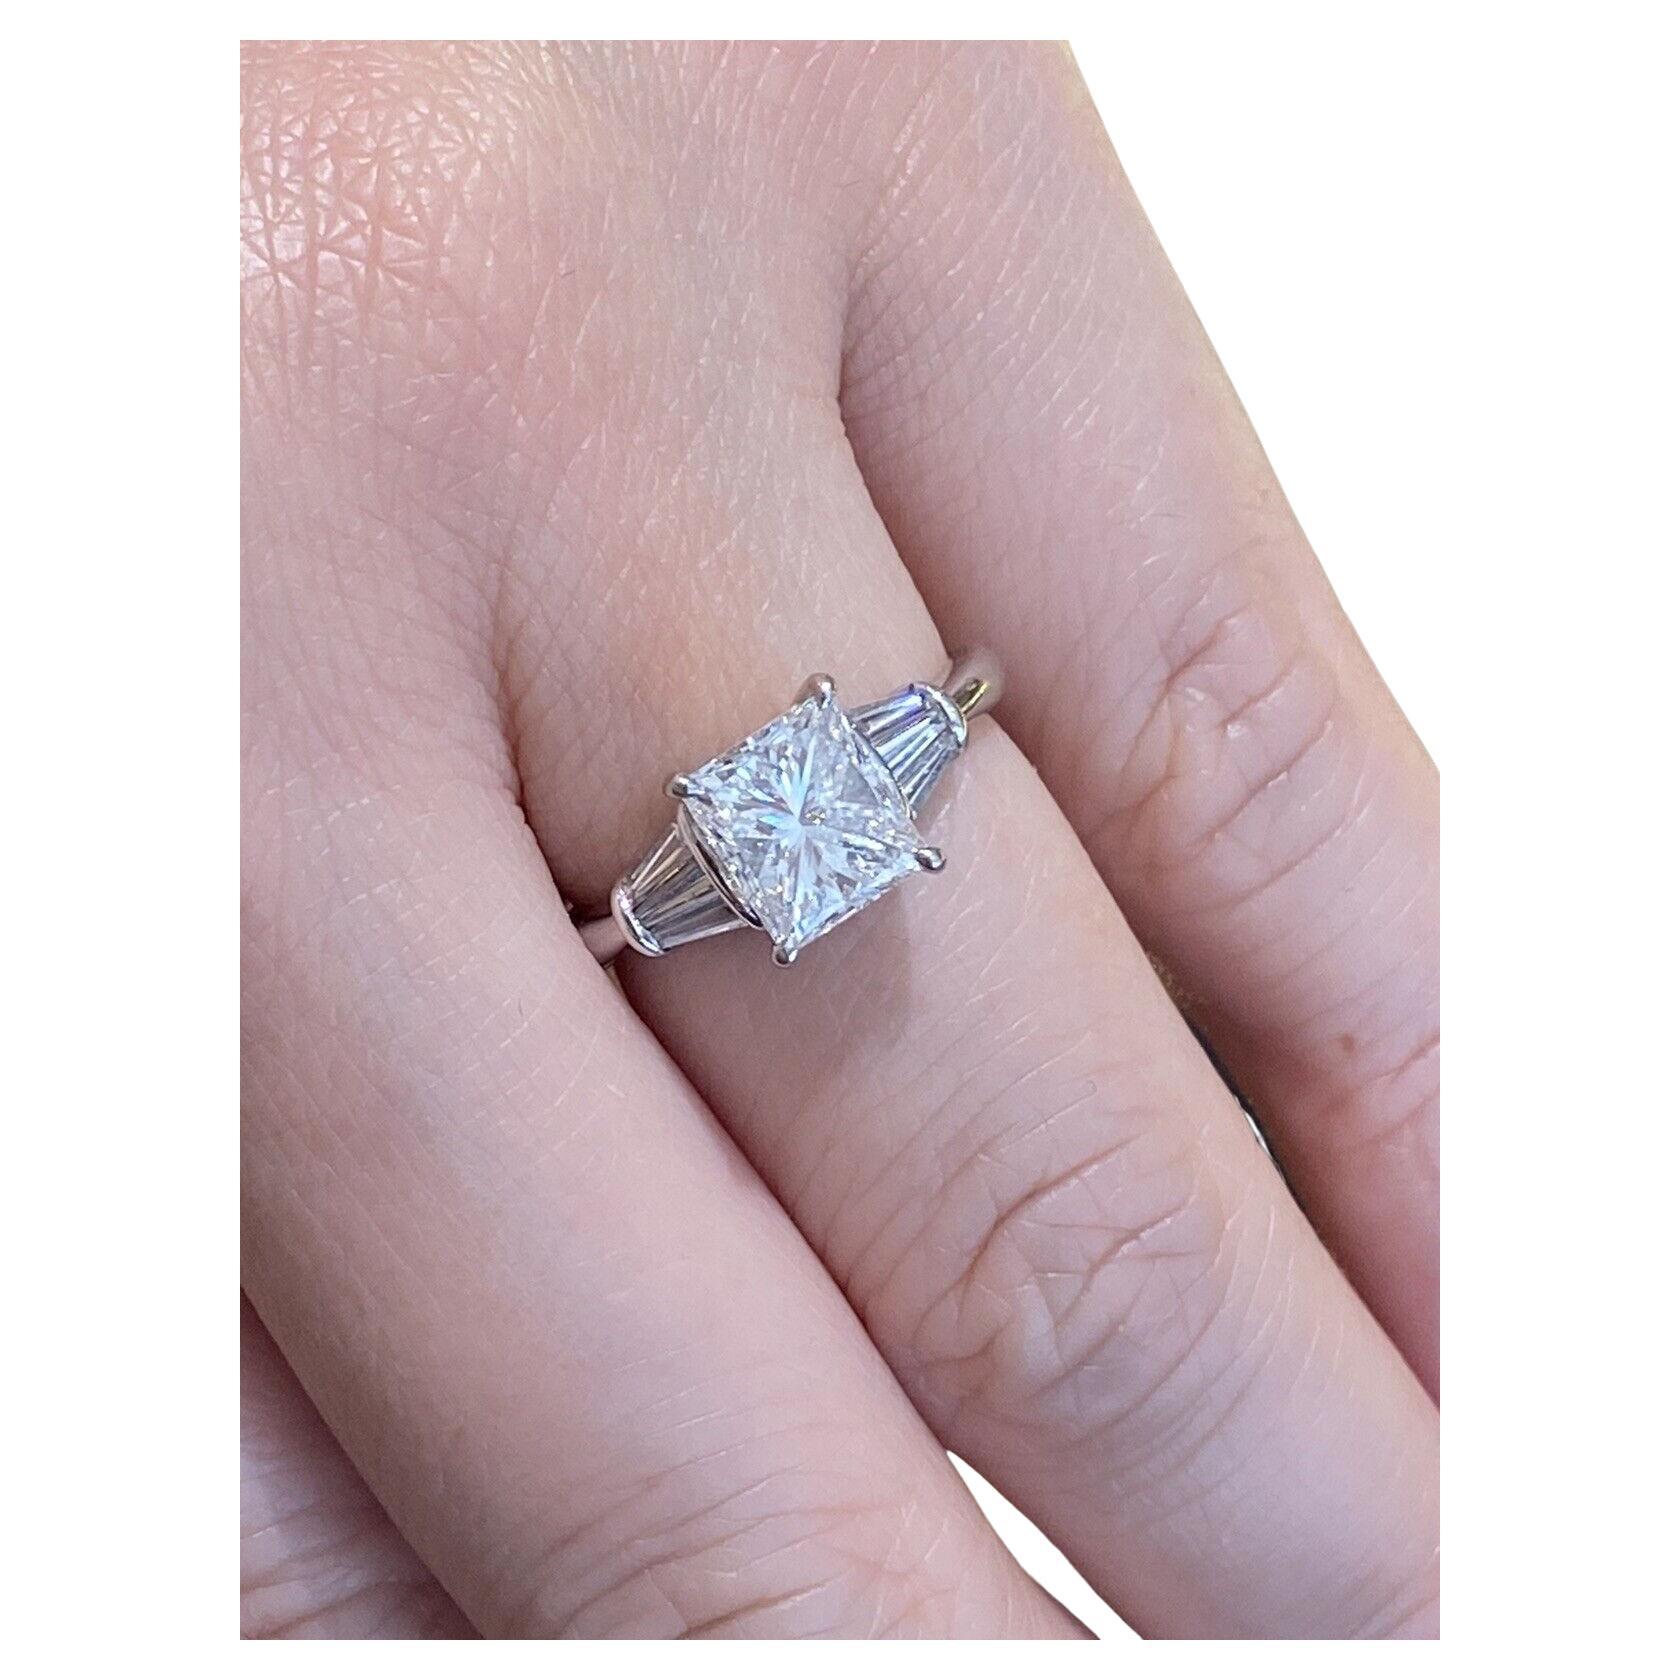 GIA 2.02 Carat E color Radiant Diamond with Baguettes Ring in Platinum